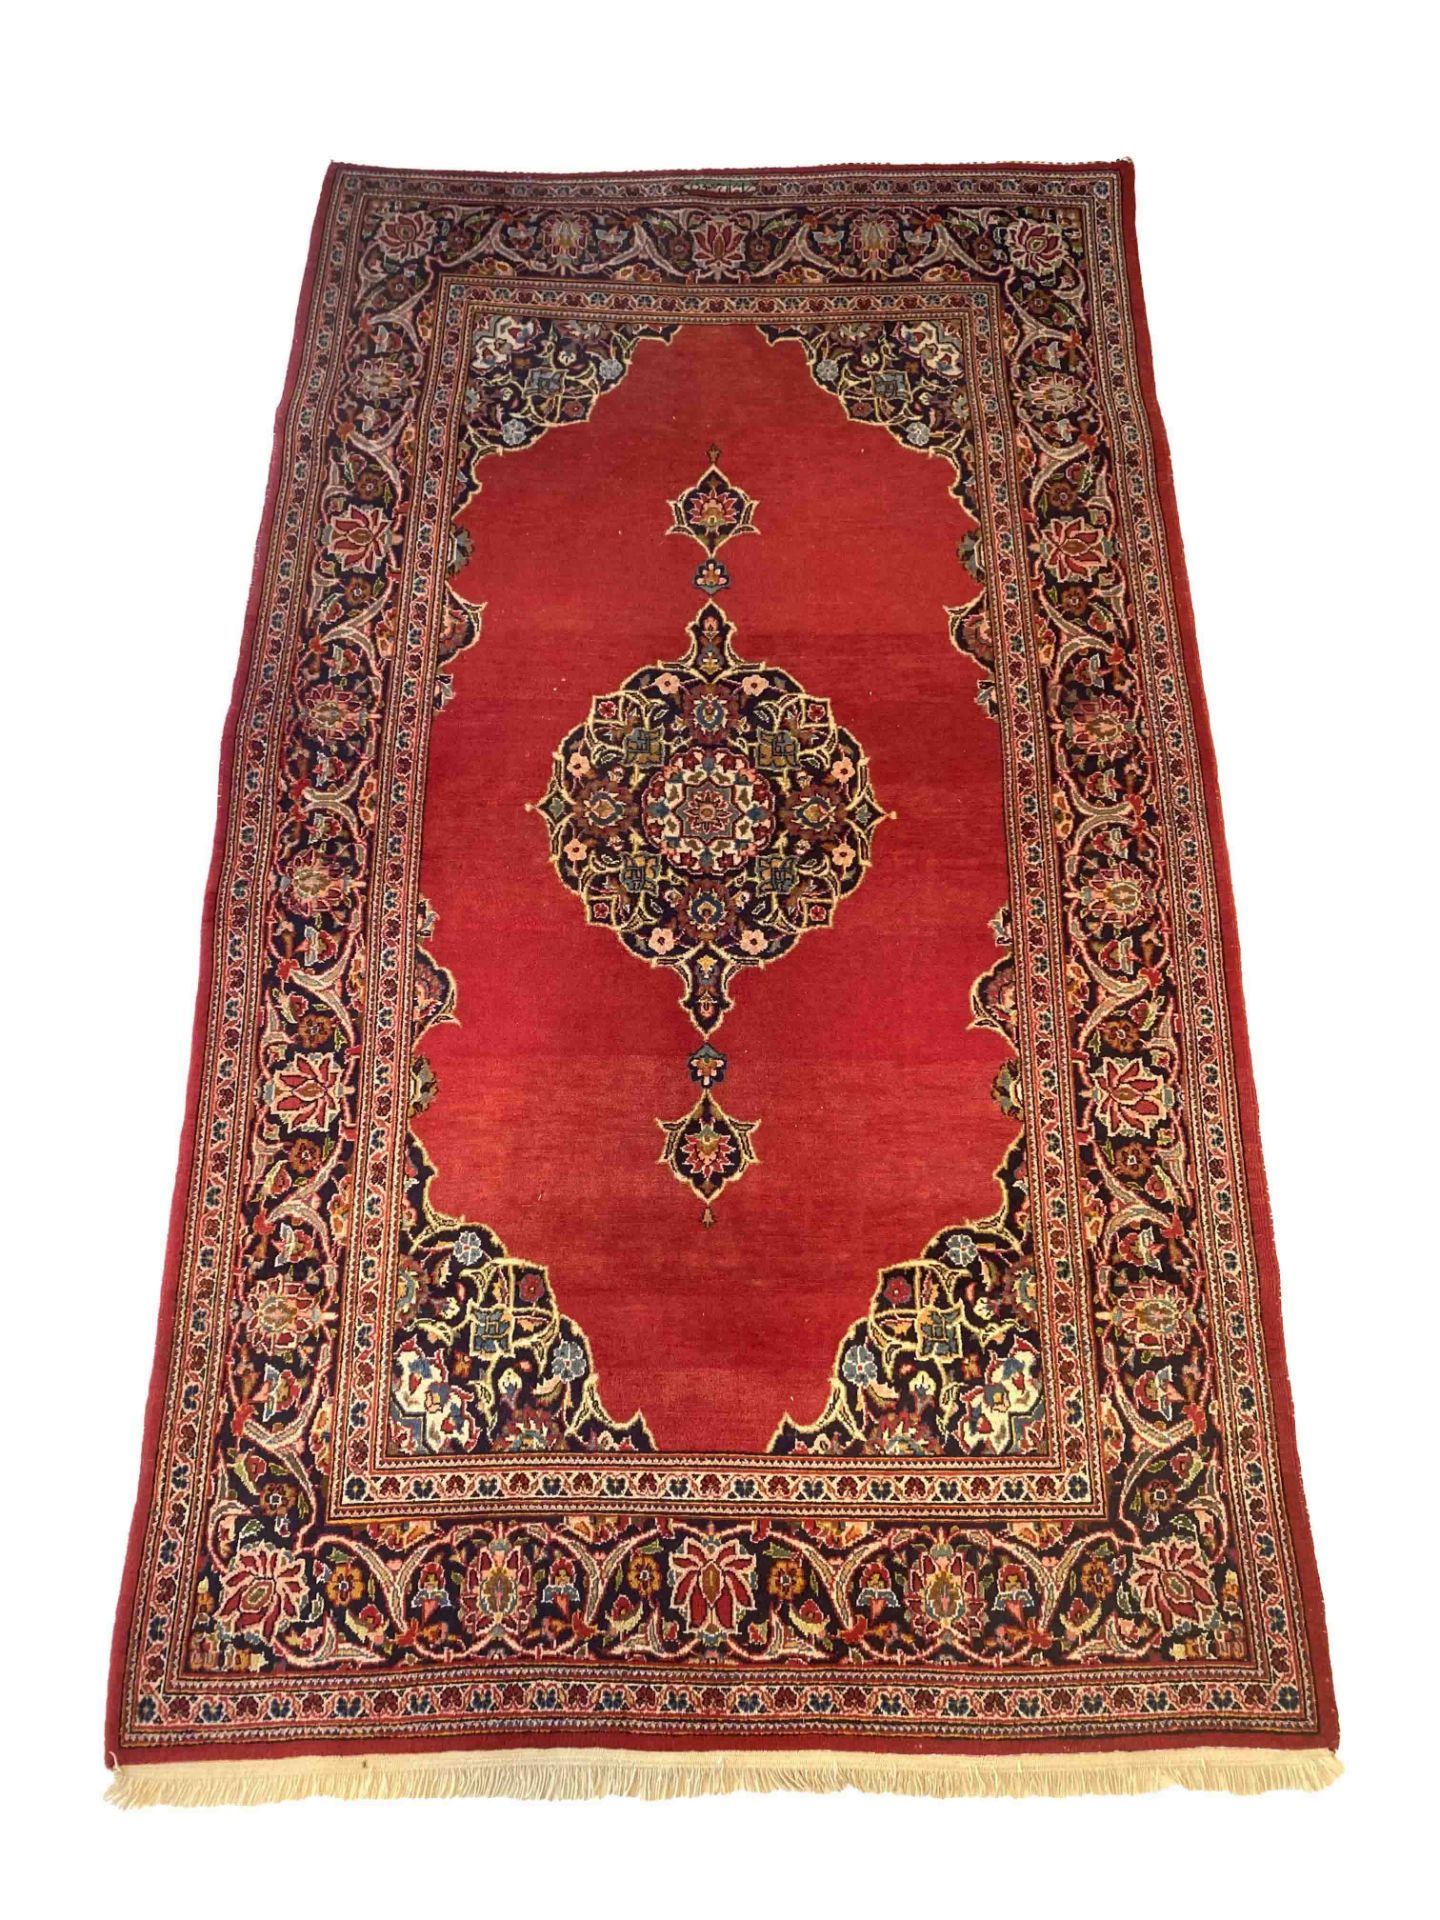 Carpet, Keshan, minor wear, 209 x 130 cm - The carpet can only be viewed and collected at another